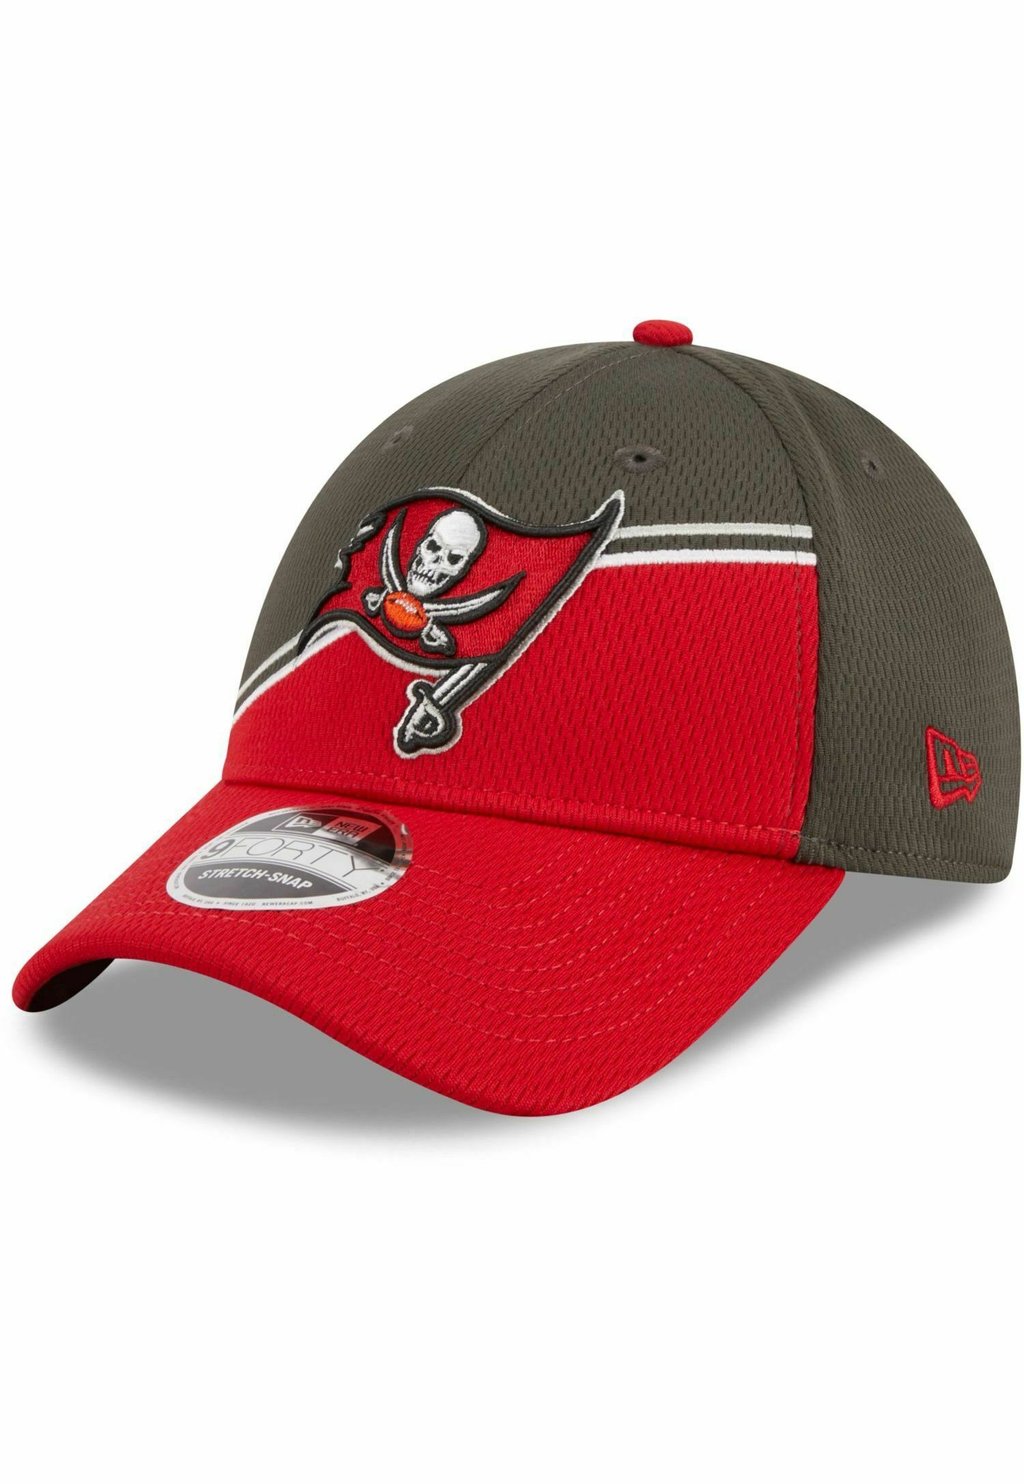 gammarus amphipod olive  red 12 Бейсболка 9FORTY SIDELINE 2023 TAMPA BAY BUCCANEERS New Era, цвет red olive